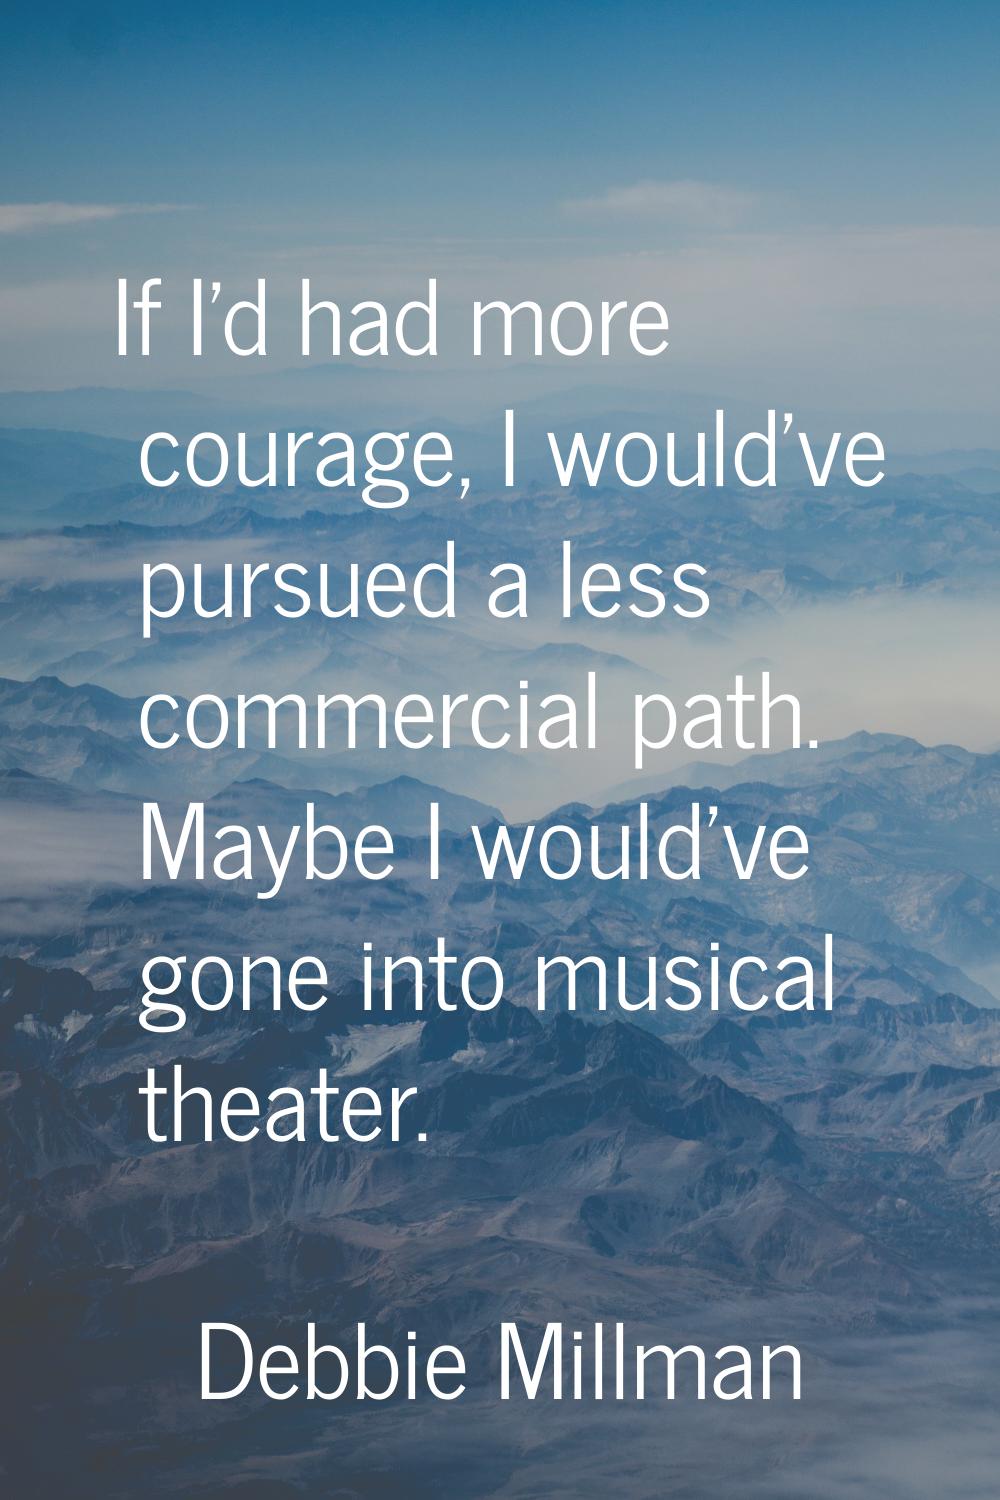 If I'd had more courage, I would've pursued a less commercial path. Maybe I would've gone into musi